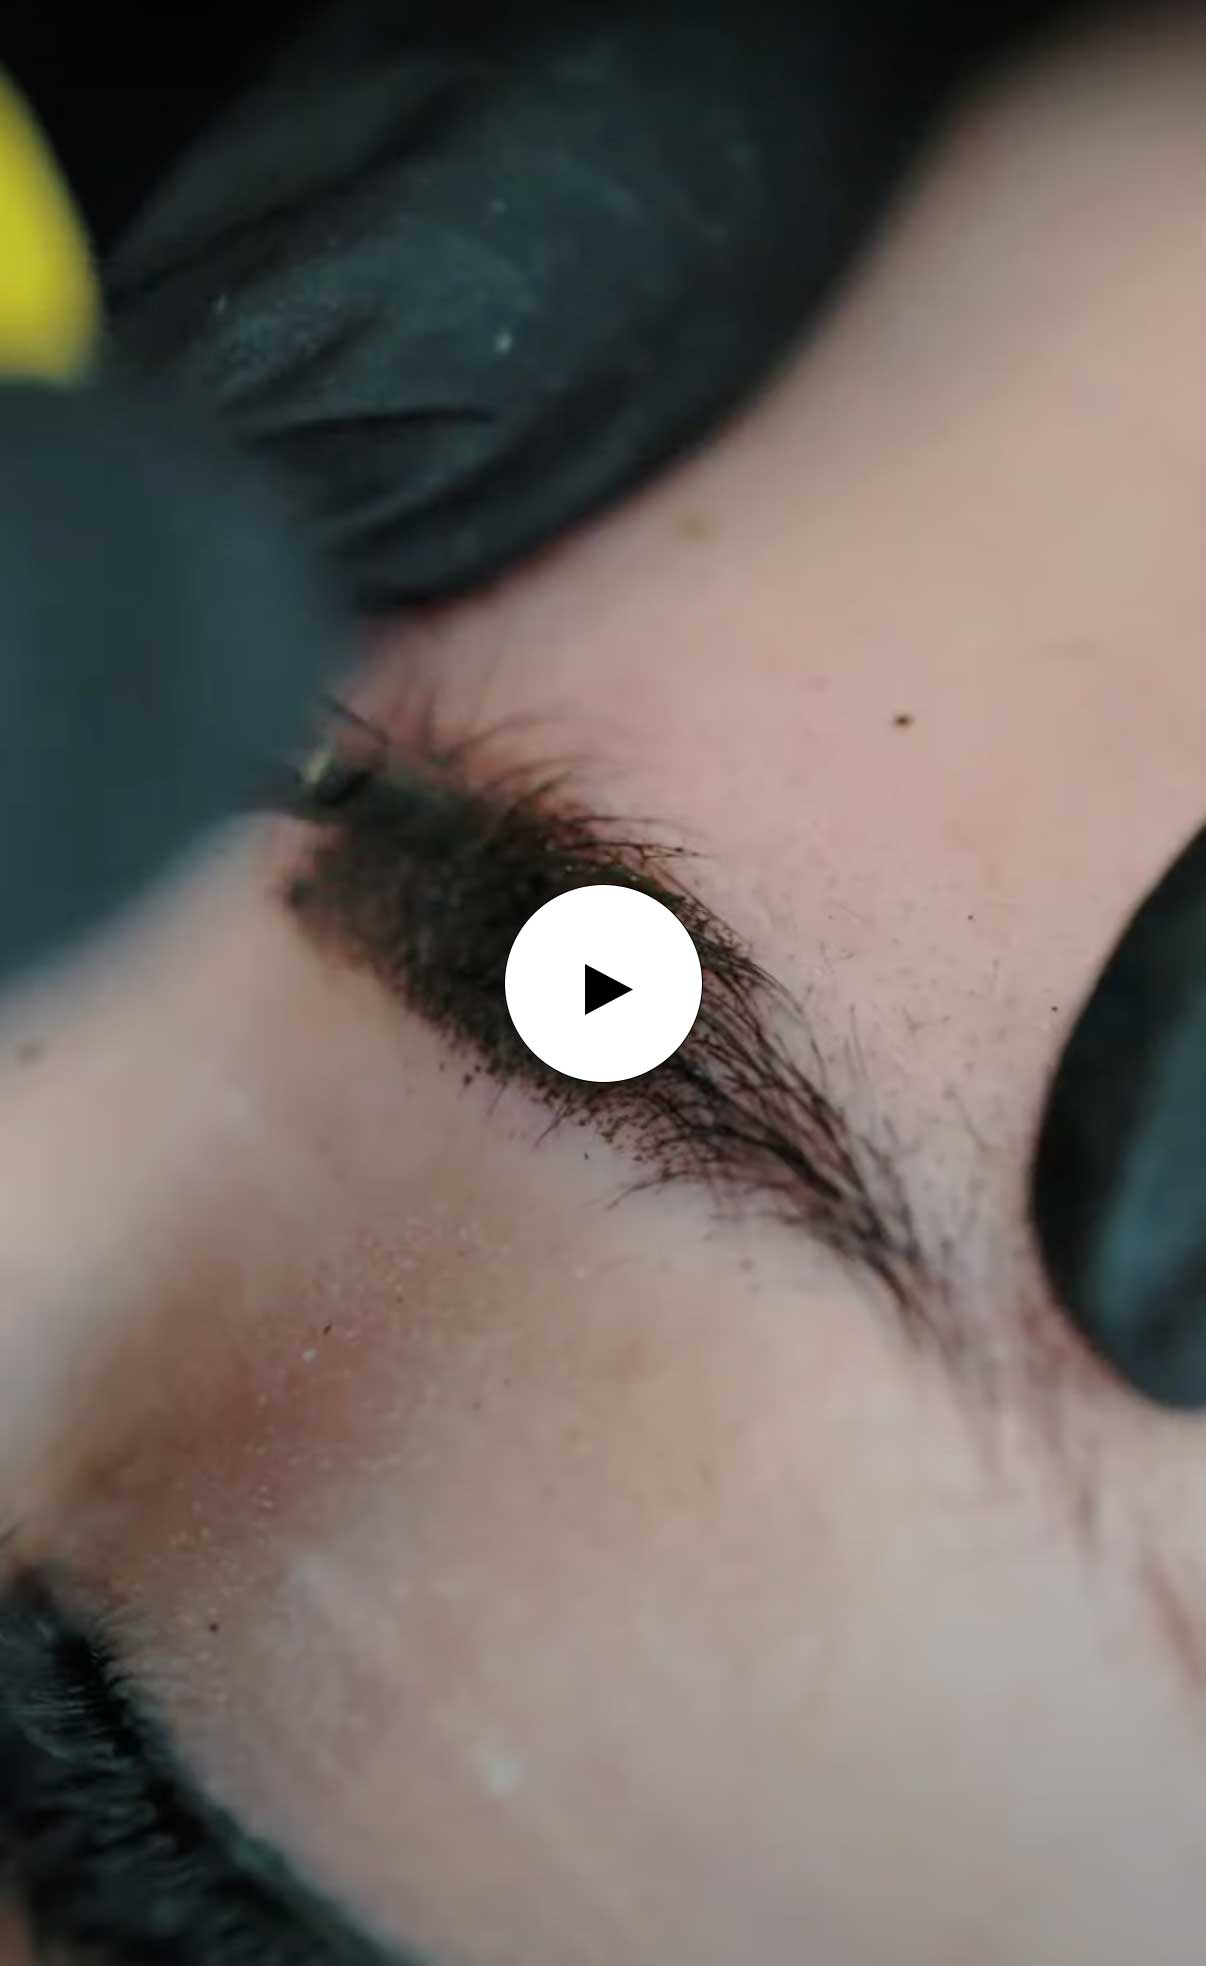 Eyebrows Tattoo. Cosmetic and Mediical Tattoo by Dasha. Permanent makeup and reconstructive tattoo, scalp micro-pigmentation in Christchurch, New Zealand